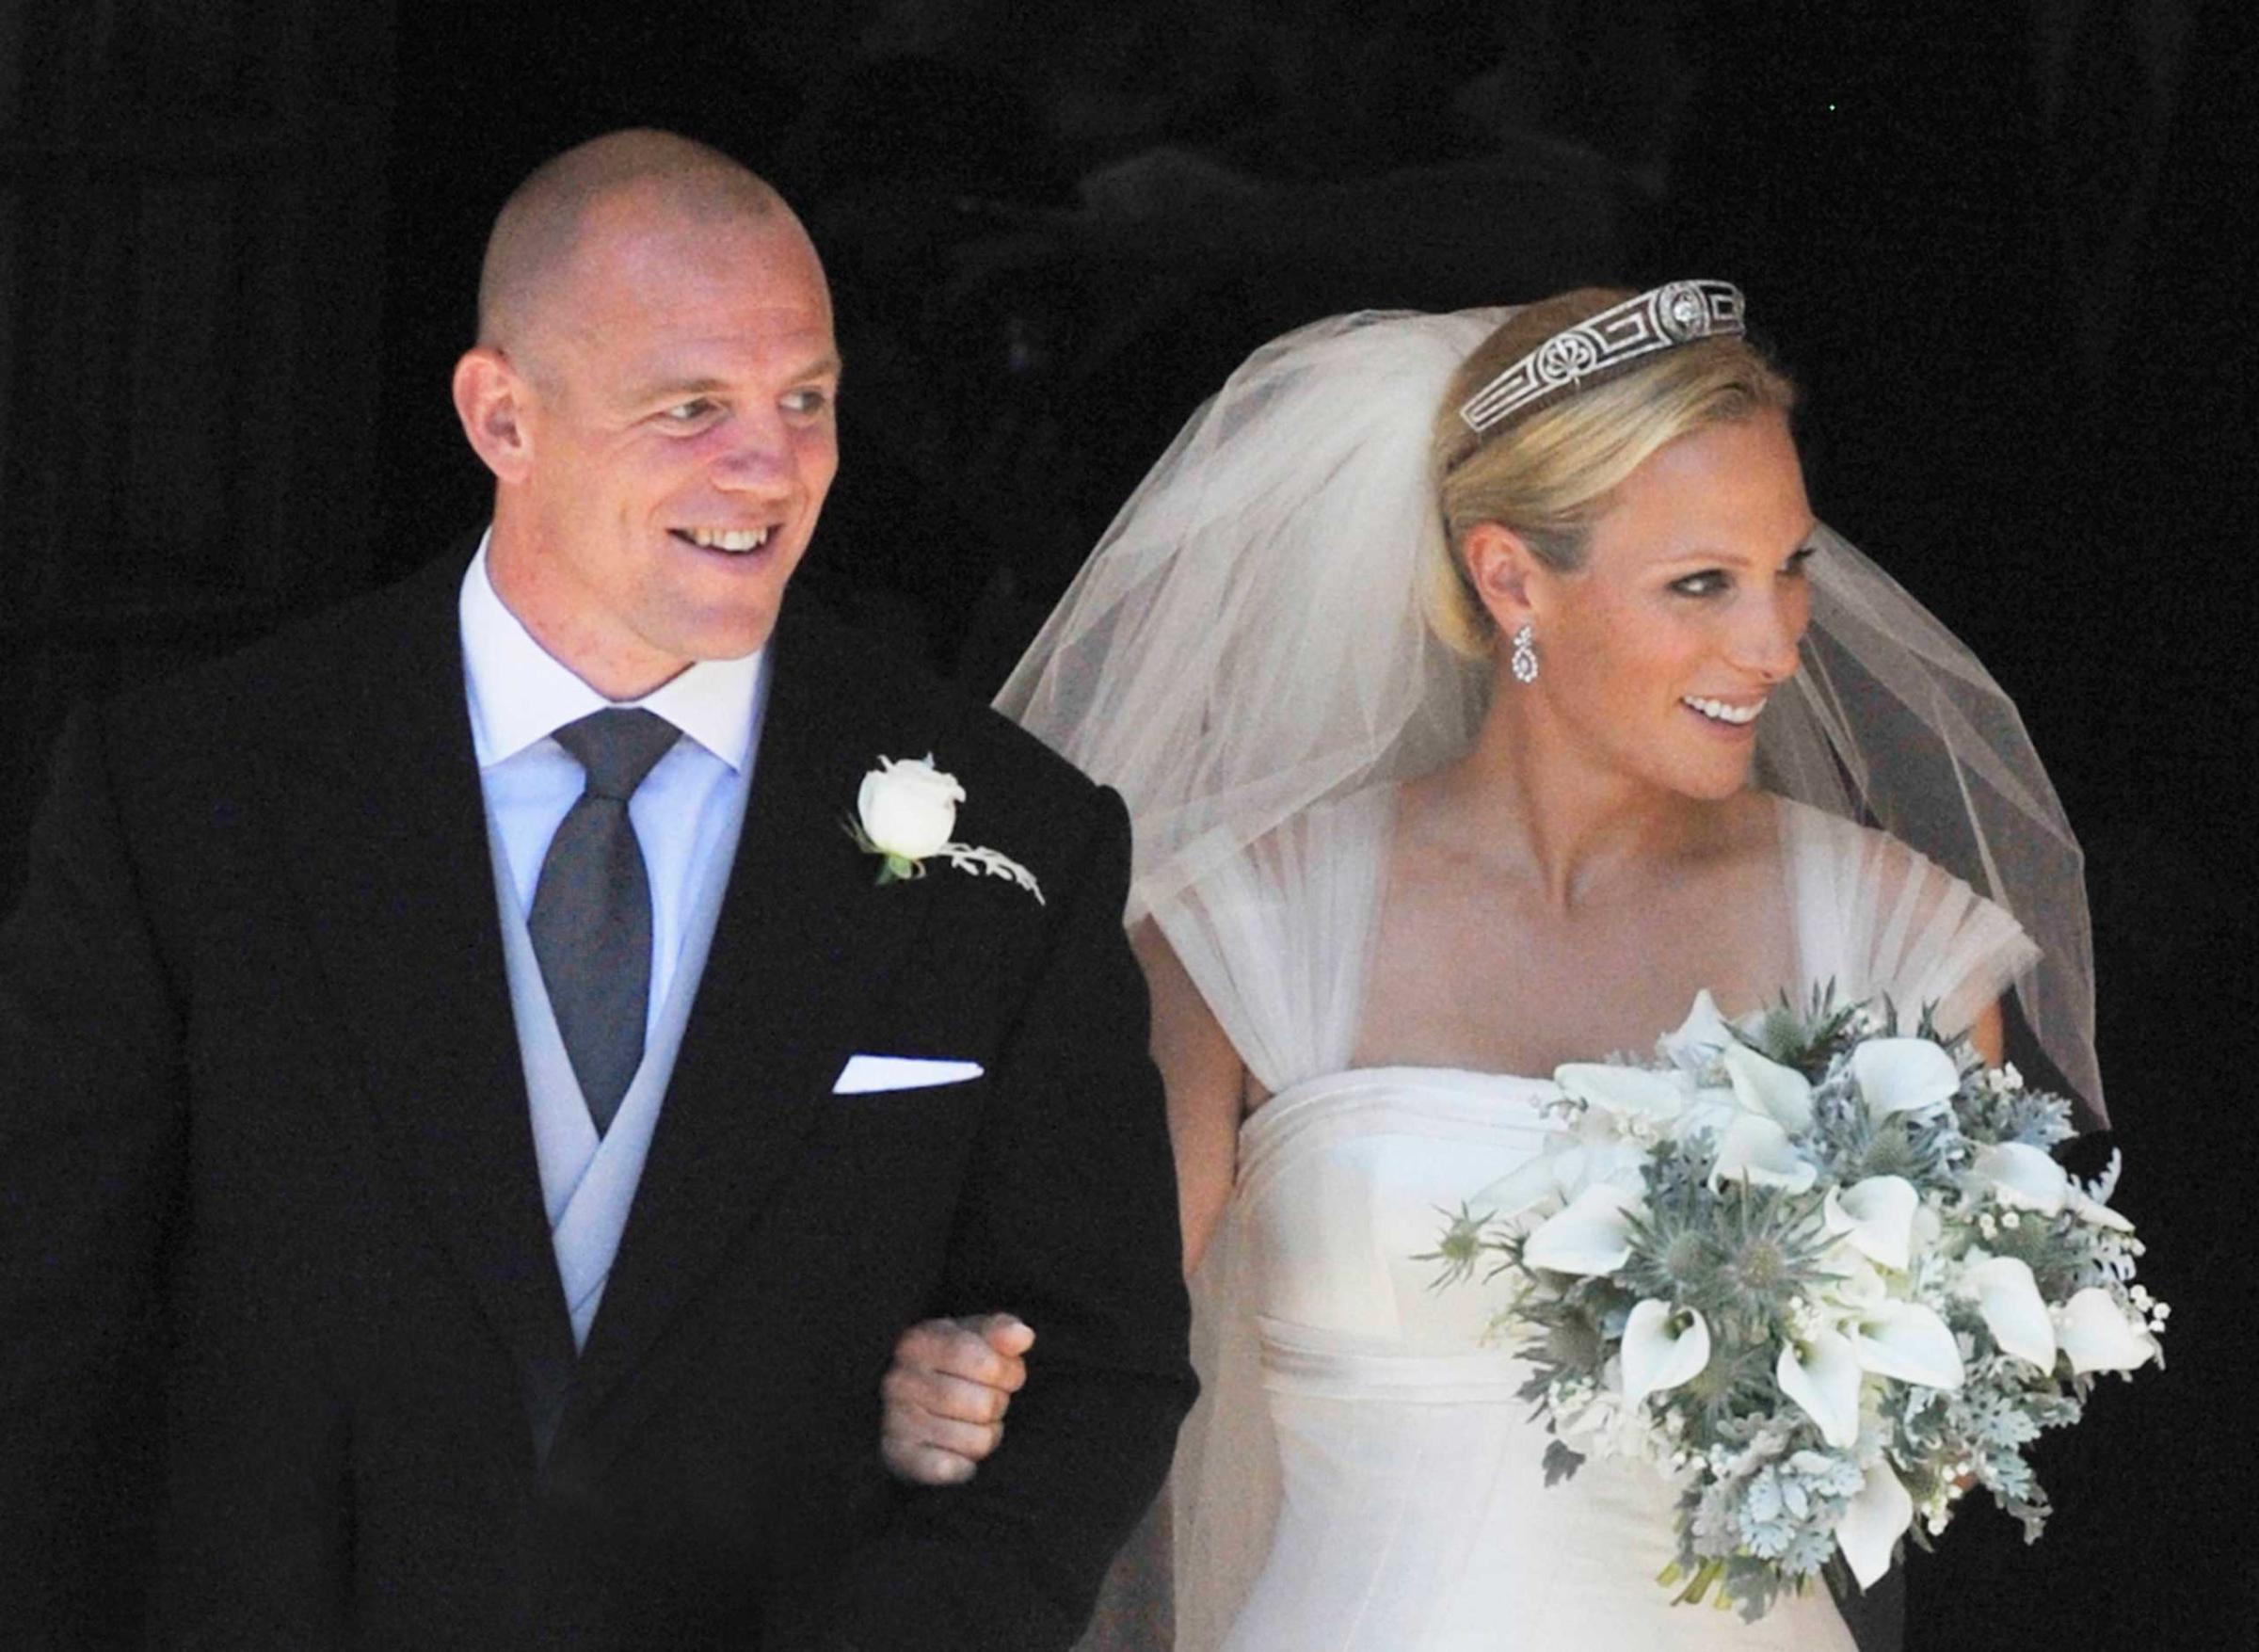 Zara Phillips and Mike Tindall in Edinburgh on July 30, 2011.